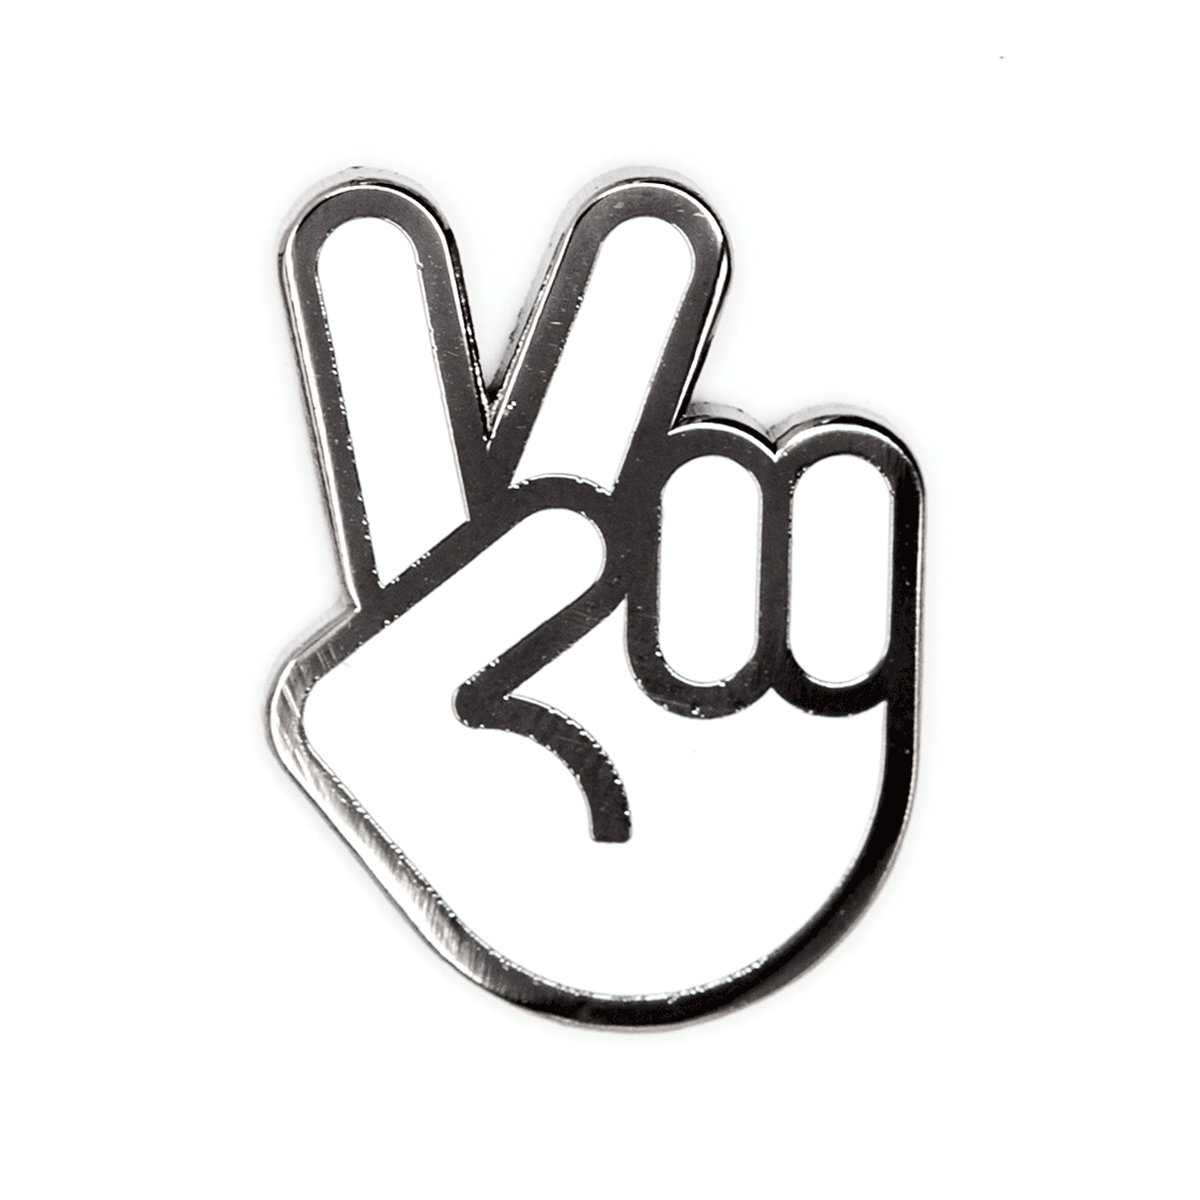 These Are Things - Peace Hand Enamel Pin